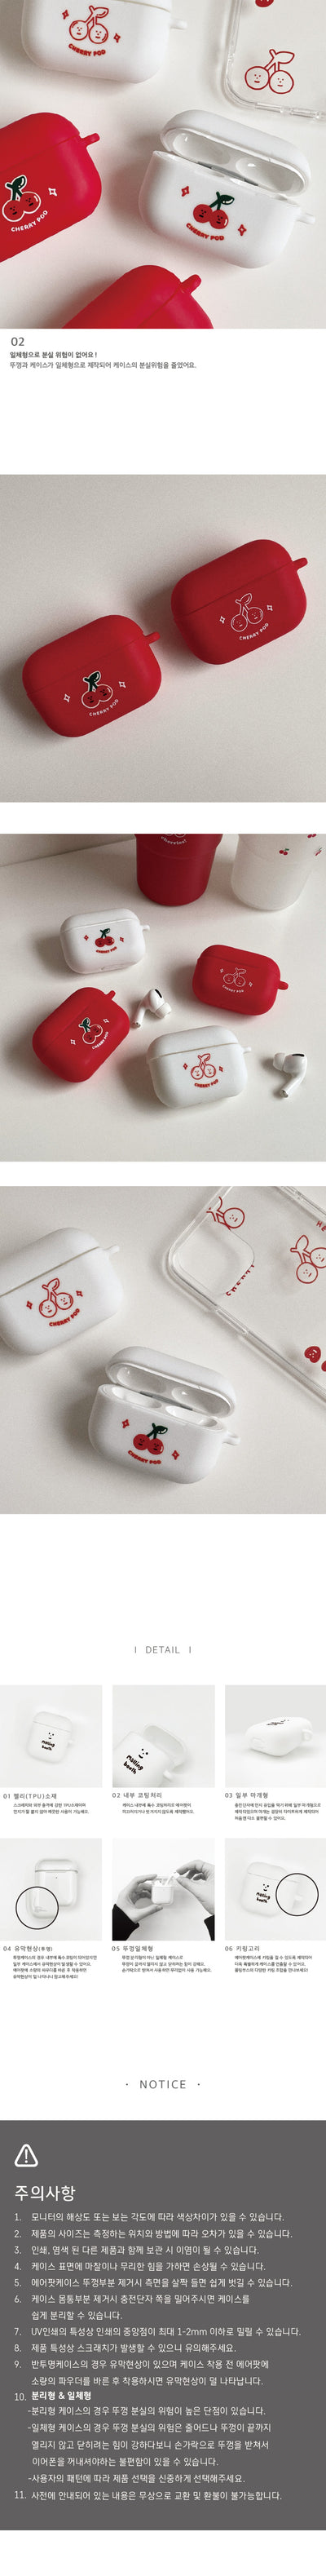 Twinkle cherry AirPods Proケース